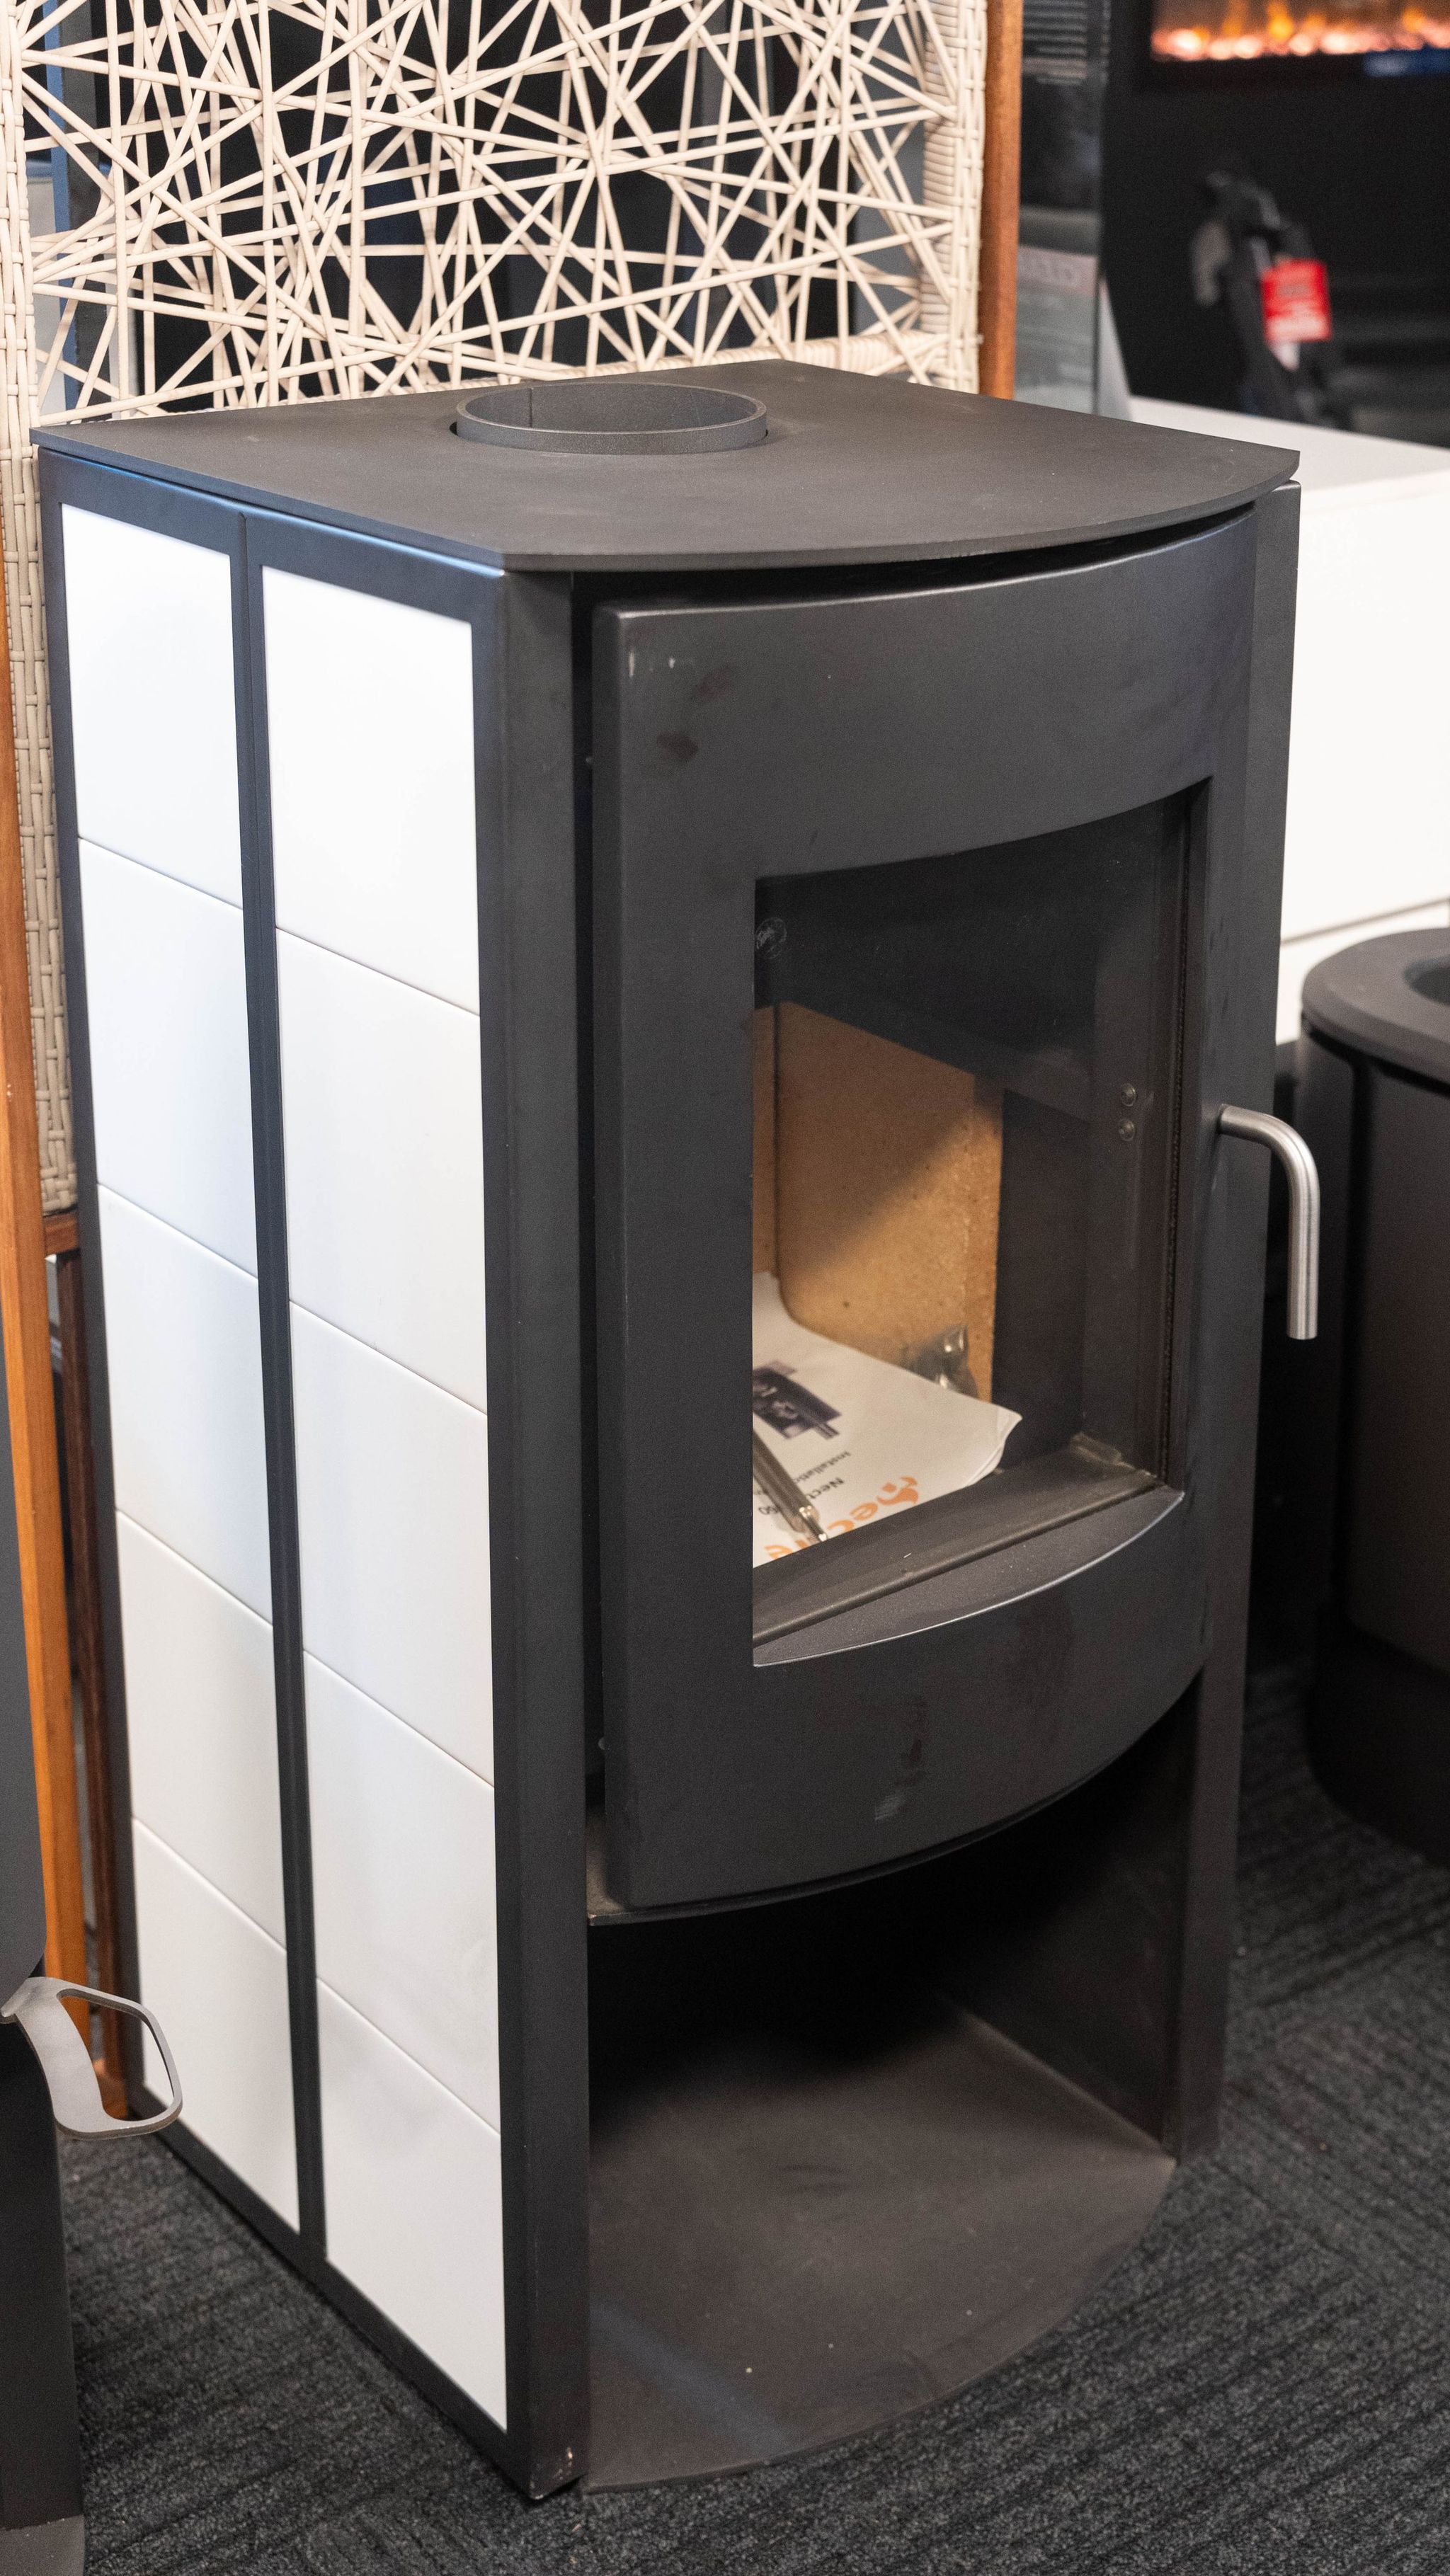 Clearance Sale - Nectre N60 Wood Fire with Tiled Sides